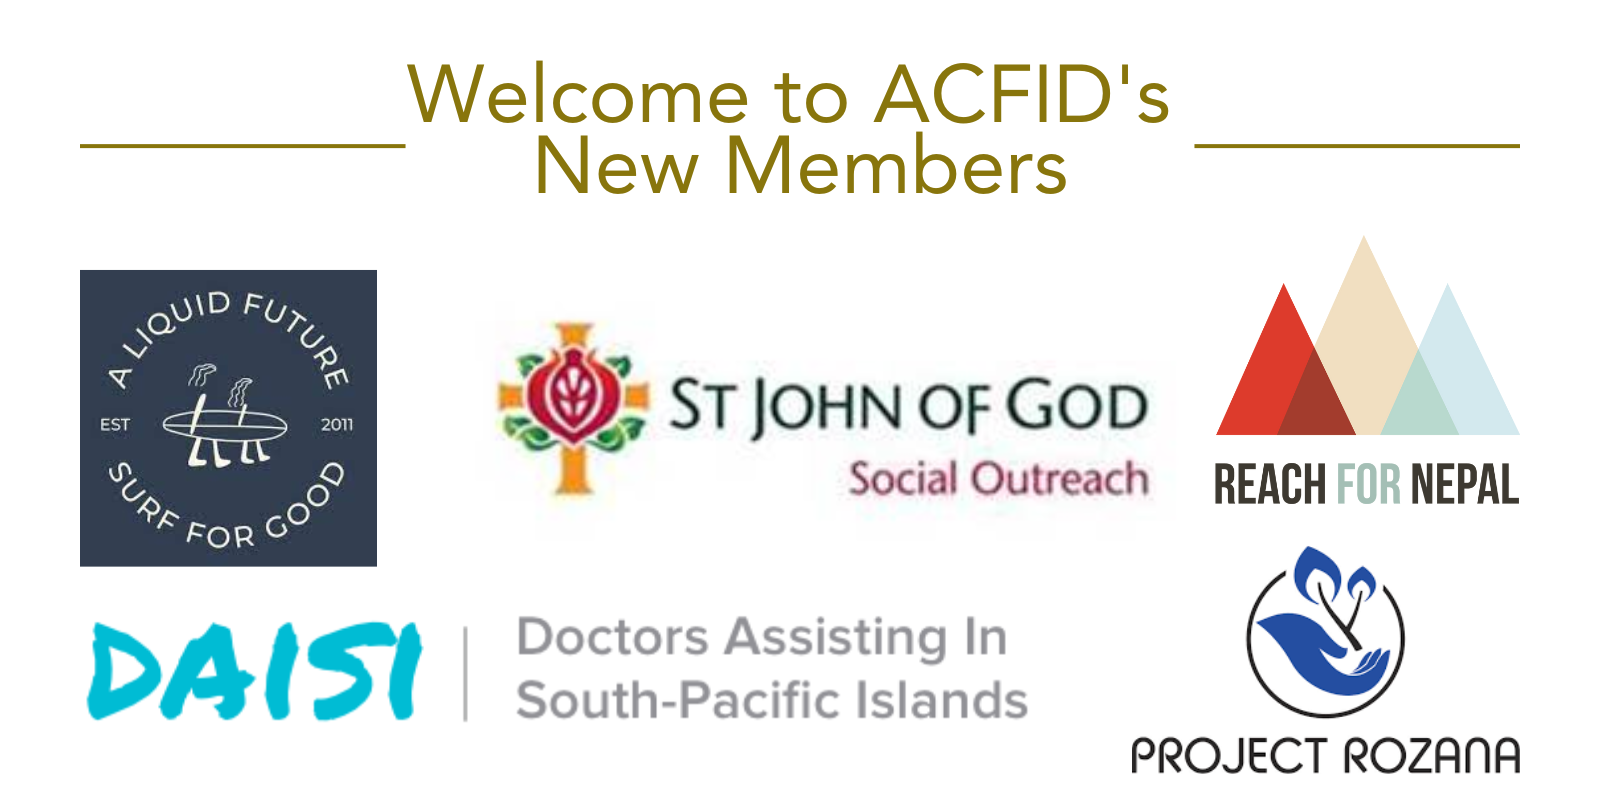 Welcome to ACFID's new members - featuring logos from Doctors Assisting In South-Pacific Islands (DAISI®); A Liquid Future; Project Rozana; St John of God Social Outreach; REACH for Nepal Foundation